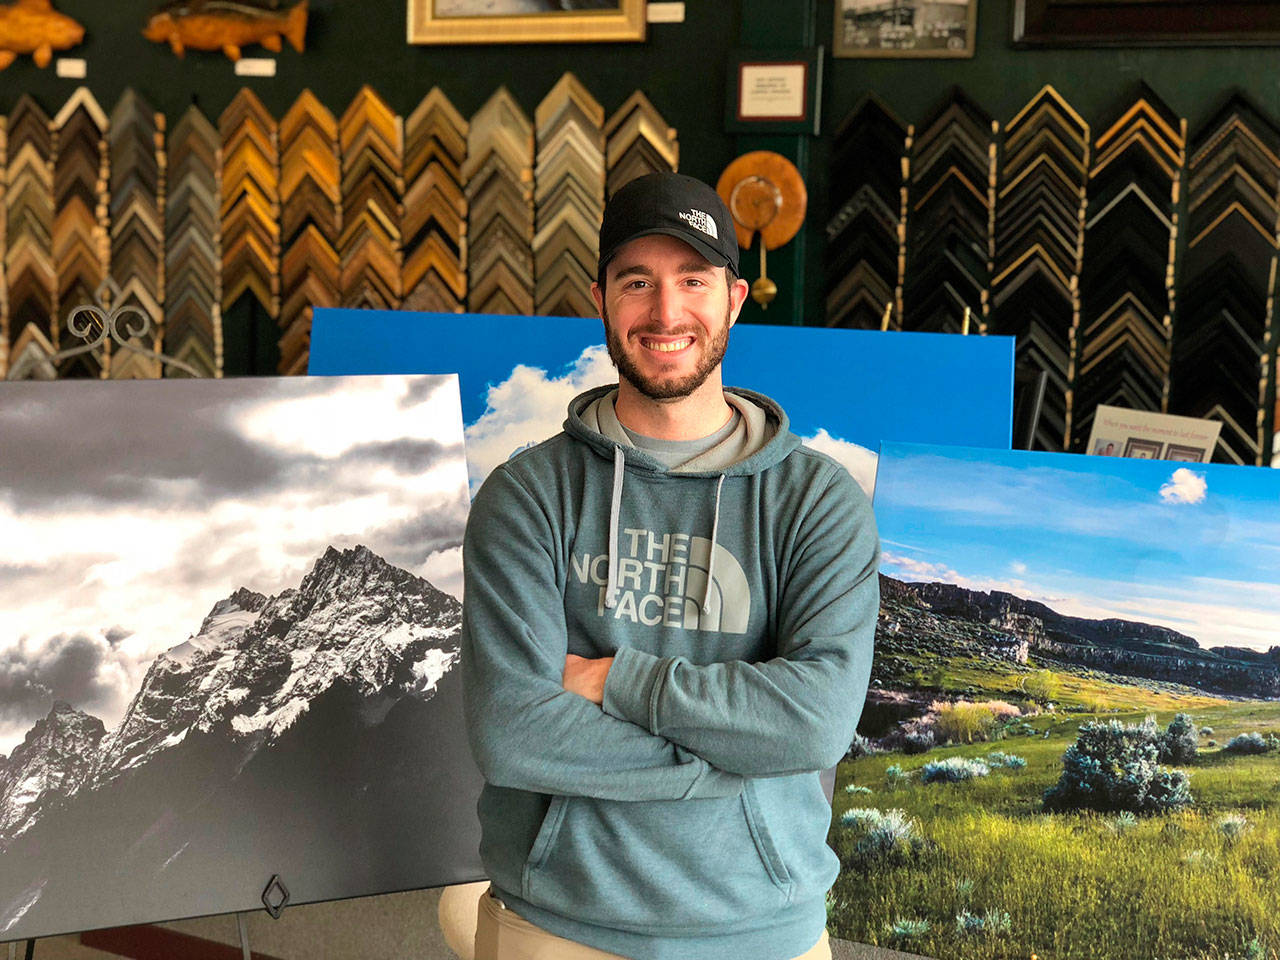 Photographer Tony Michaels recently started TMP Canvas, a canvas-making business featuring his photography. He plans to save the profits to pay for a summit to Mt. Everest, the tallest mountain in the world. Photo courtesy of Tony Michaels